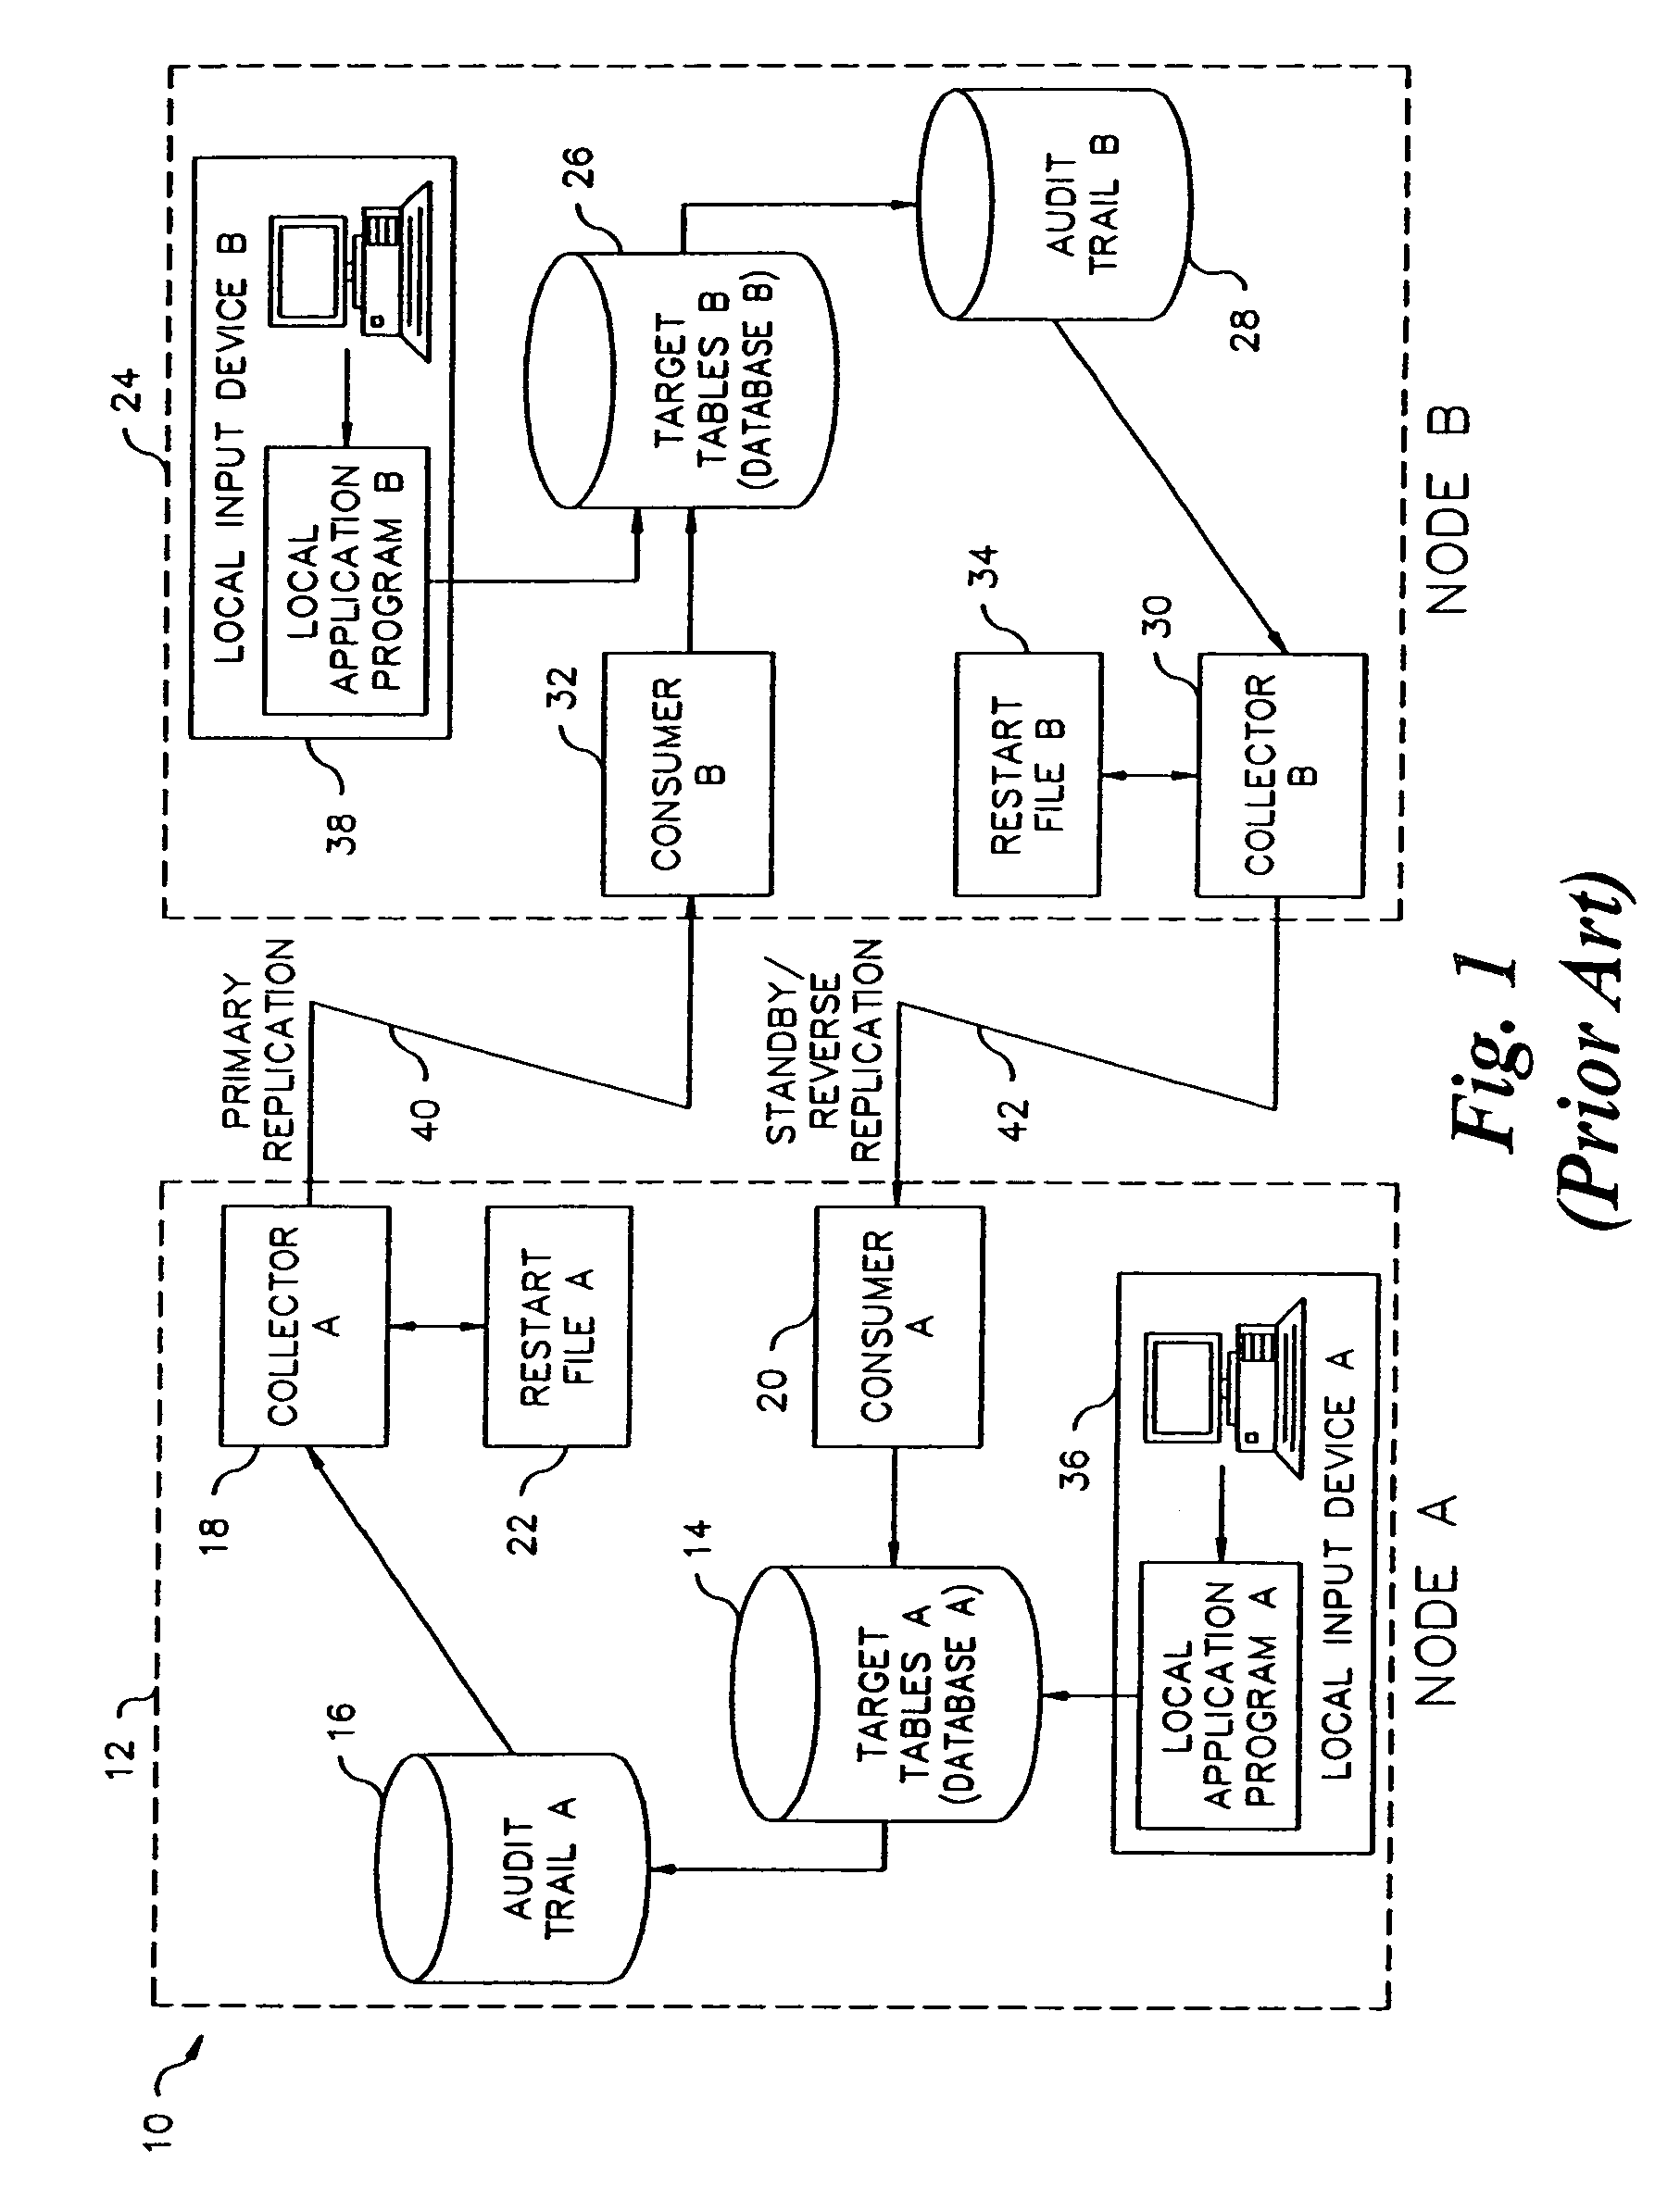 Synchronization of a target database with a source database during database replication